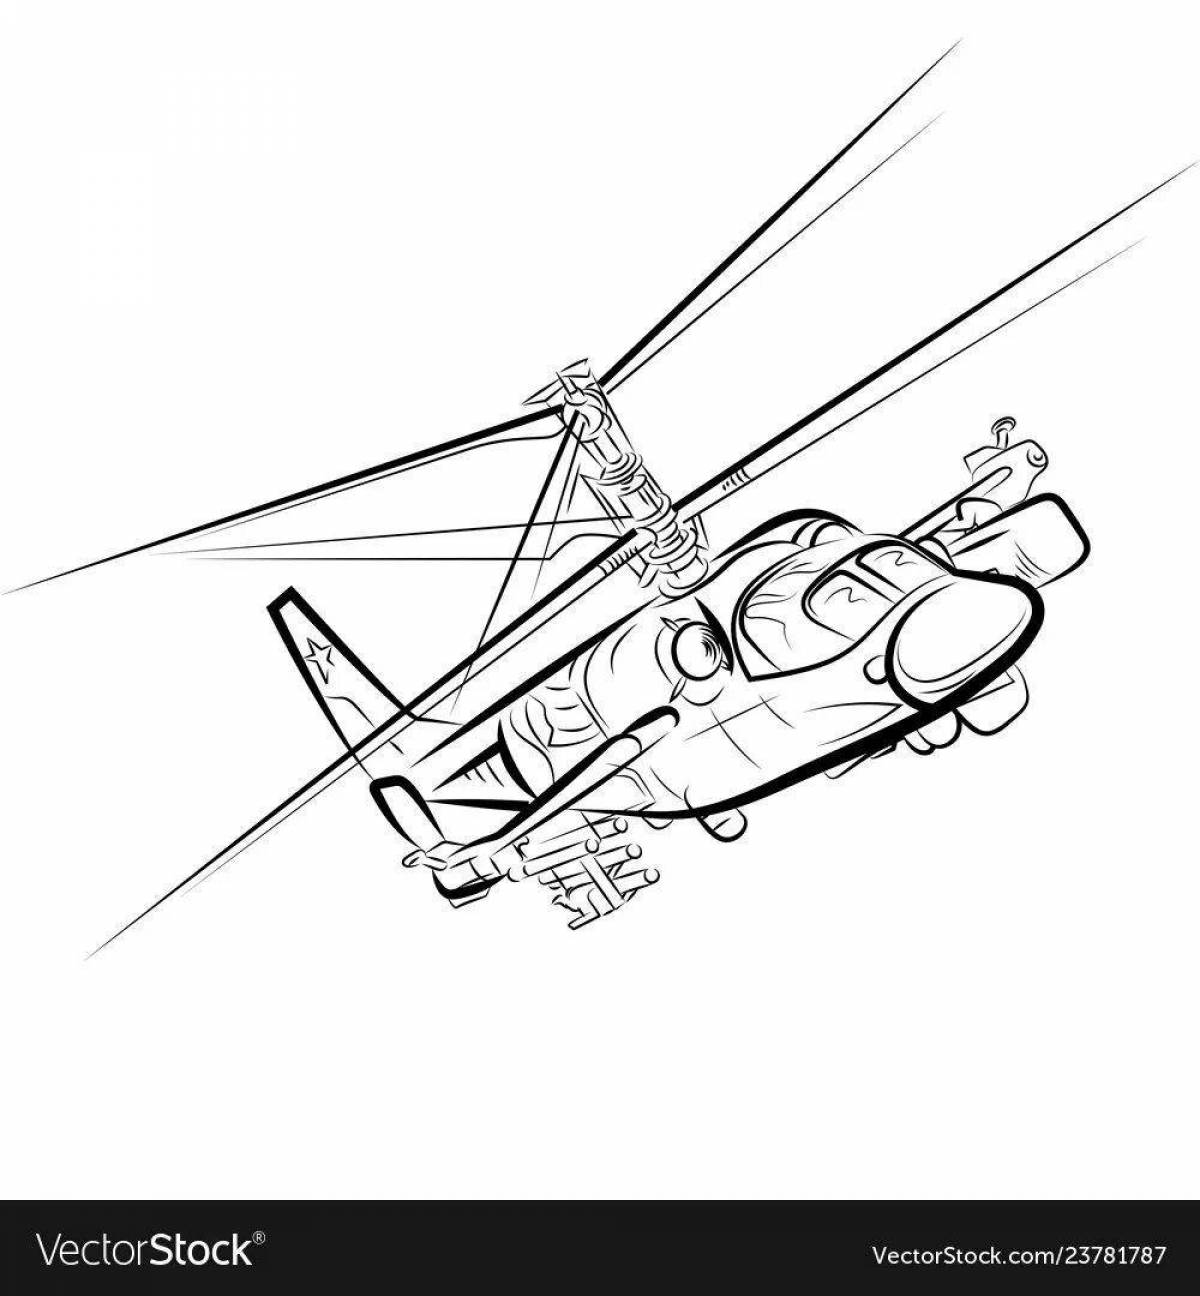 Exciting alligator helicopter coloring page